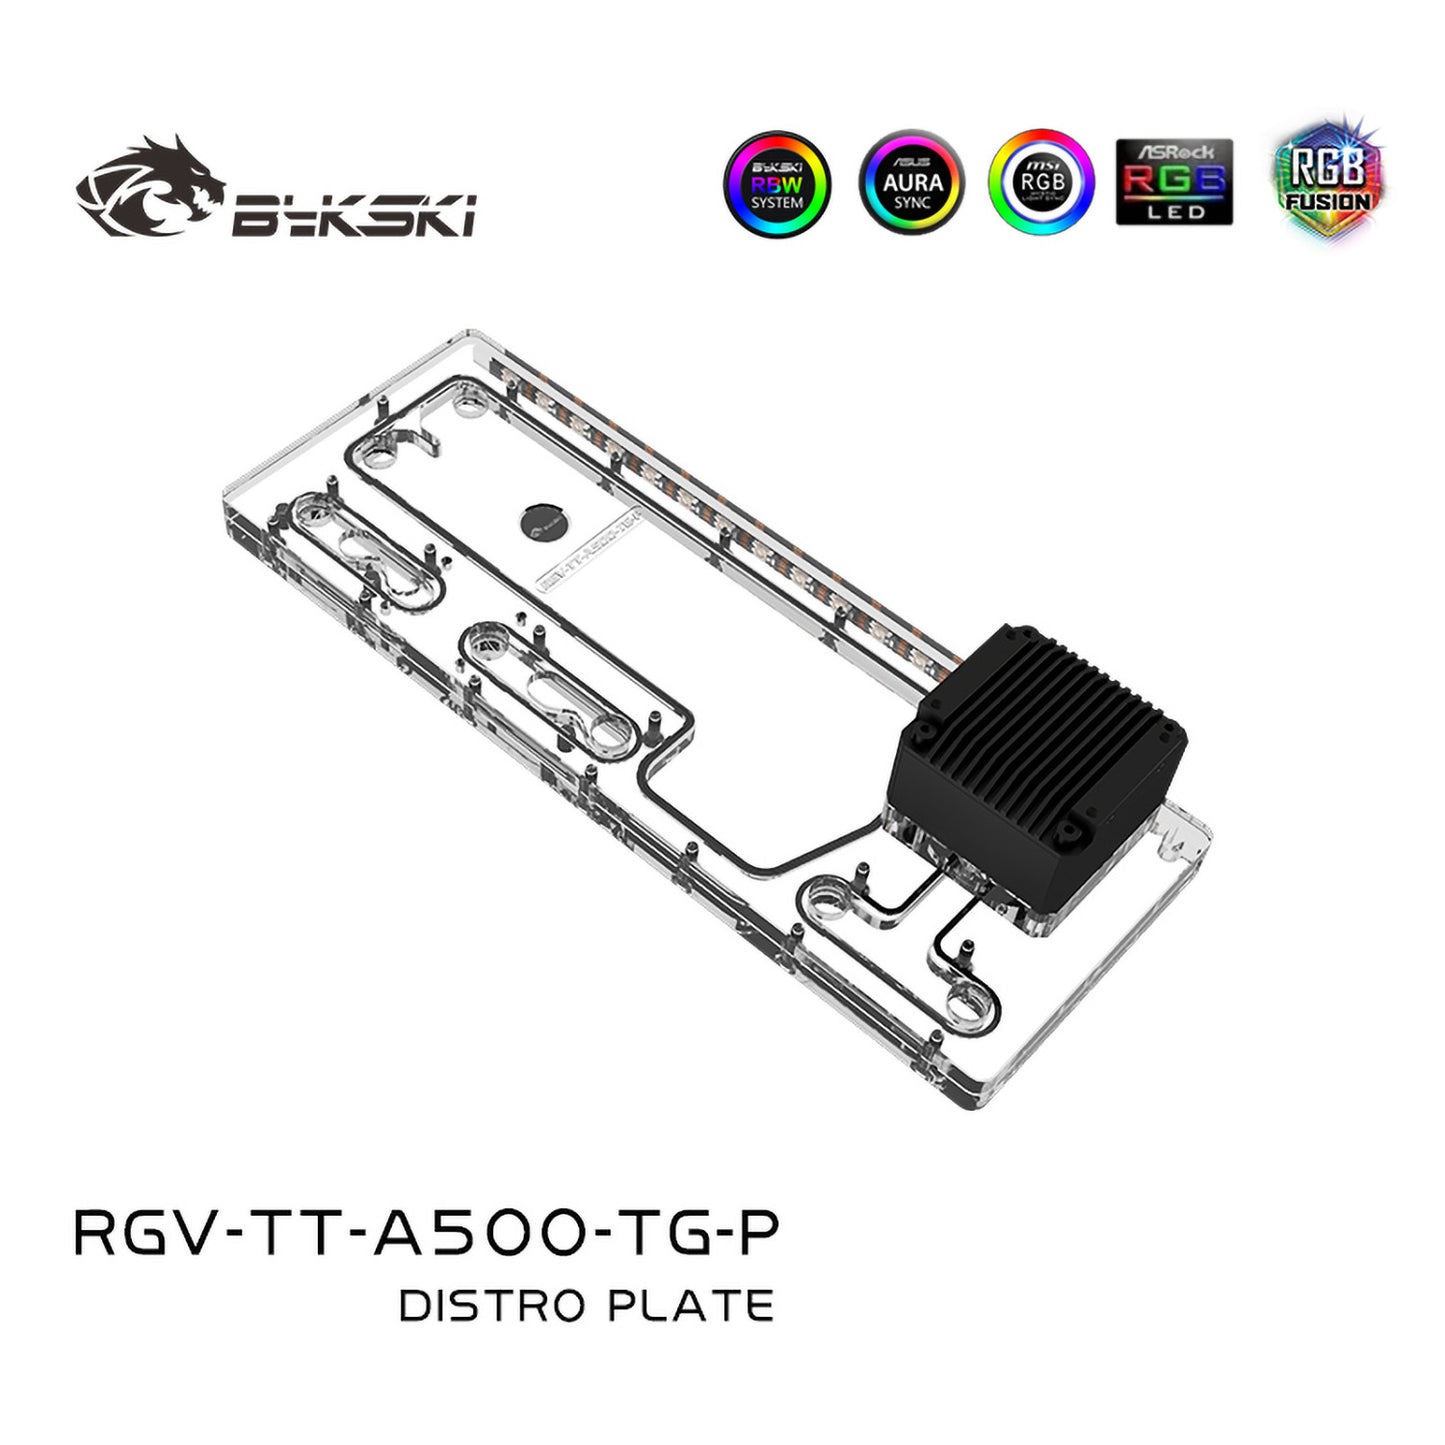 Bykski Distro Plate Kit For Thermaltake A500 TG Case, 5V A-RGB Complete Loop For Single GPU PC Building, Water Cooling Waterway Board, RGV-TT-A500-TG-P